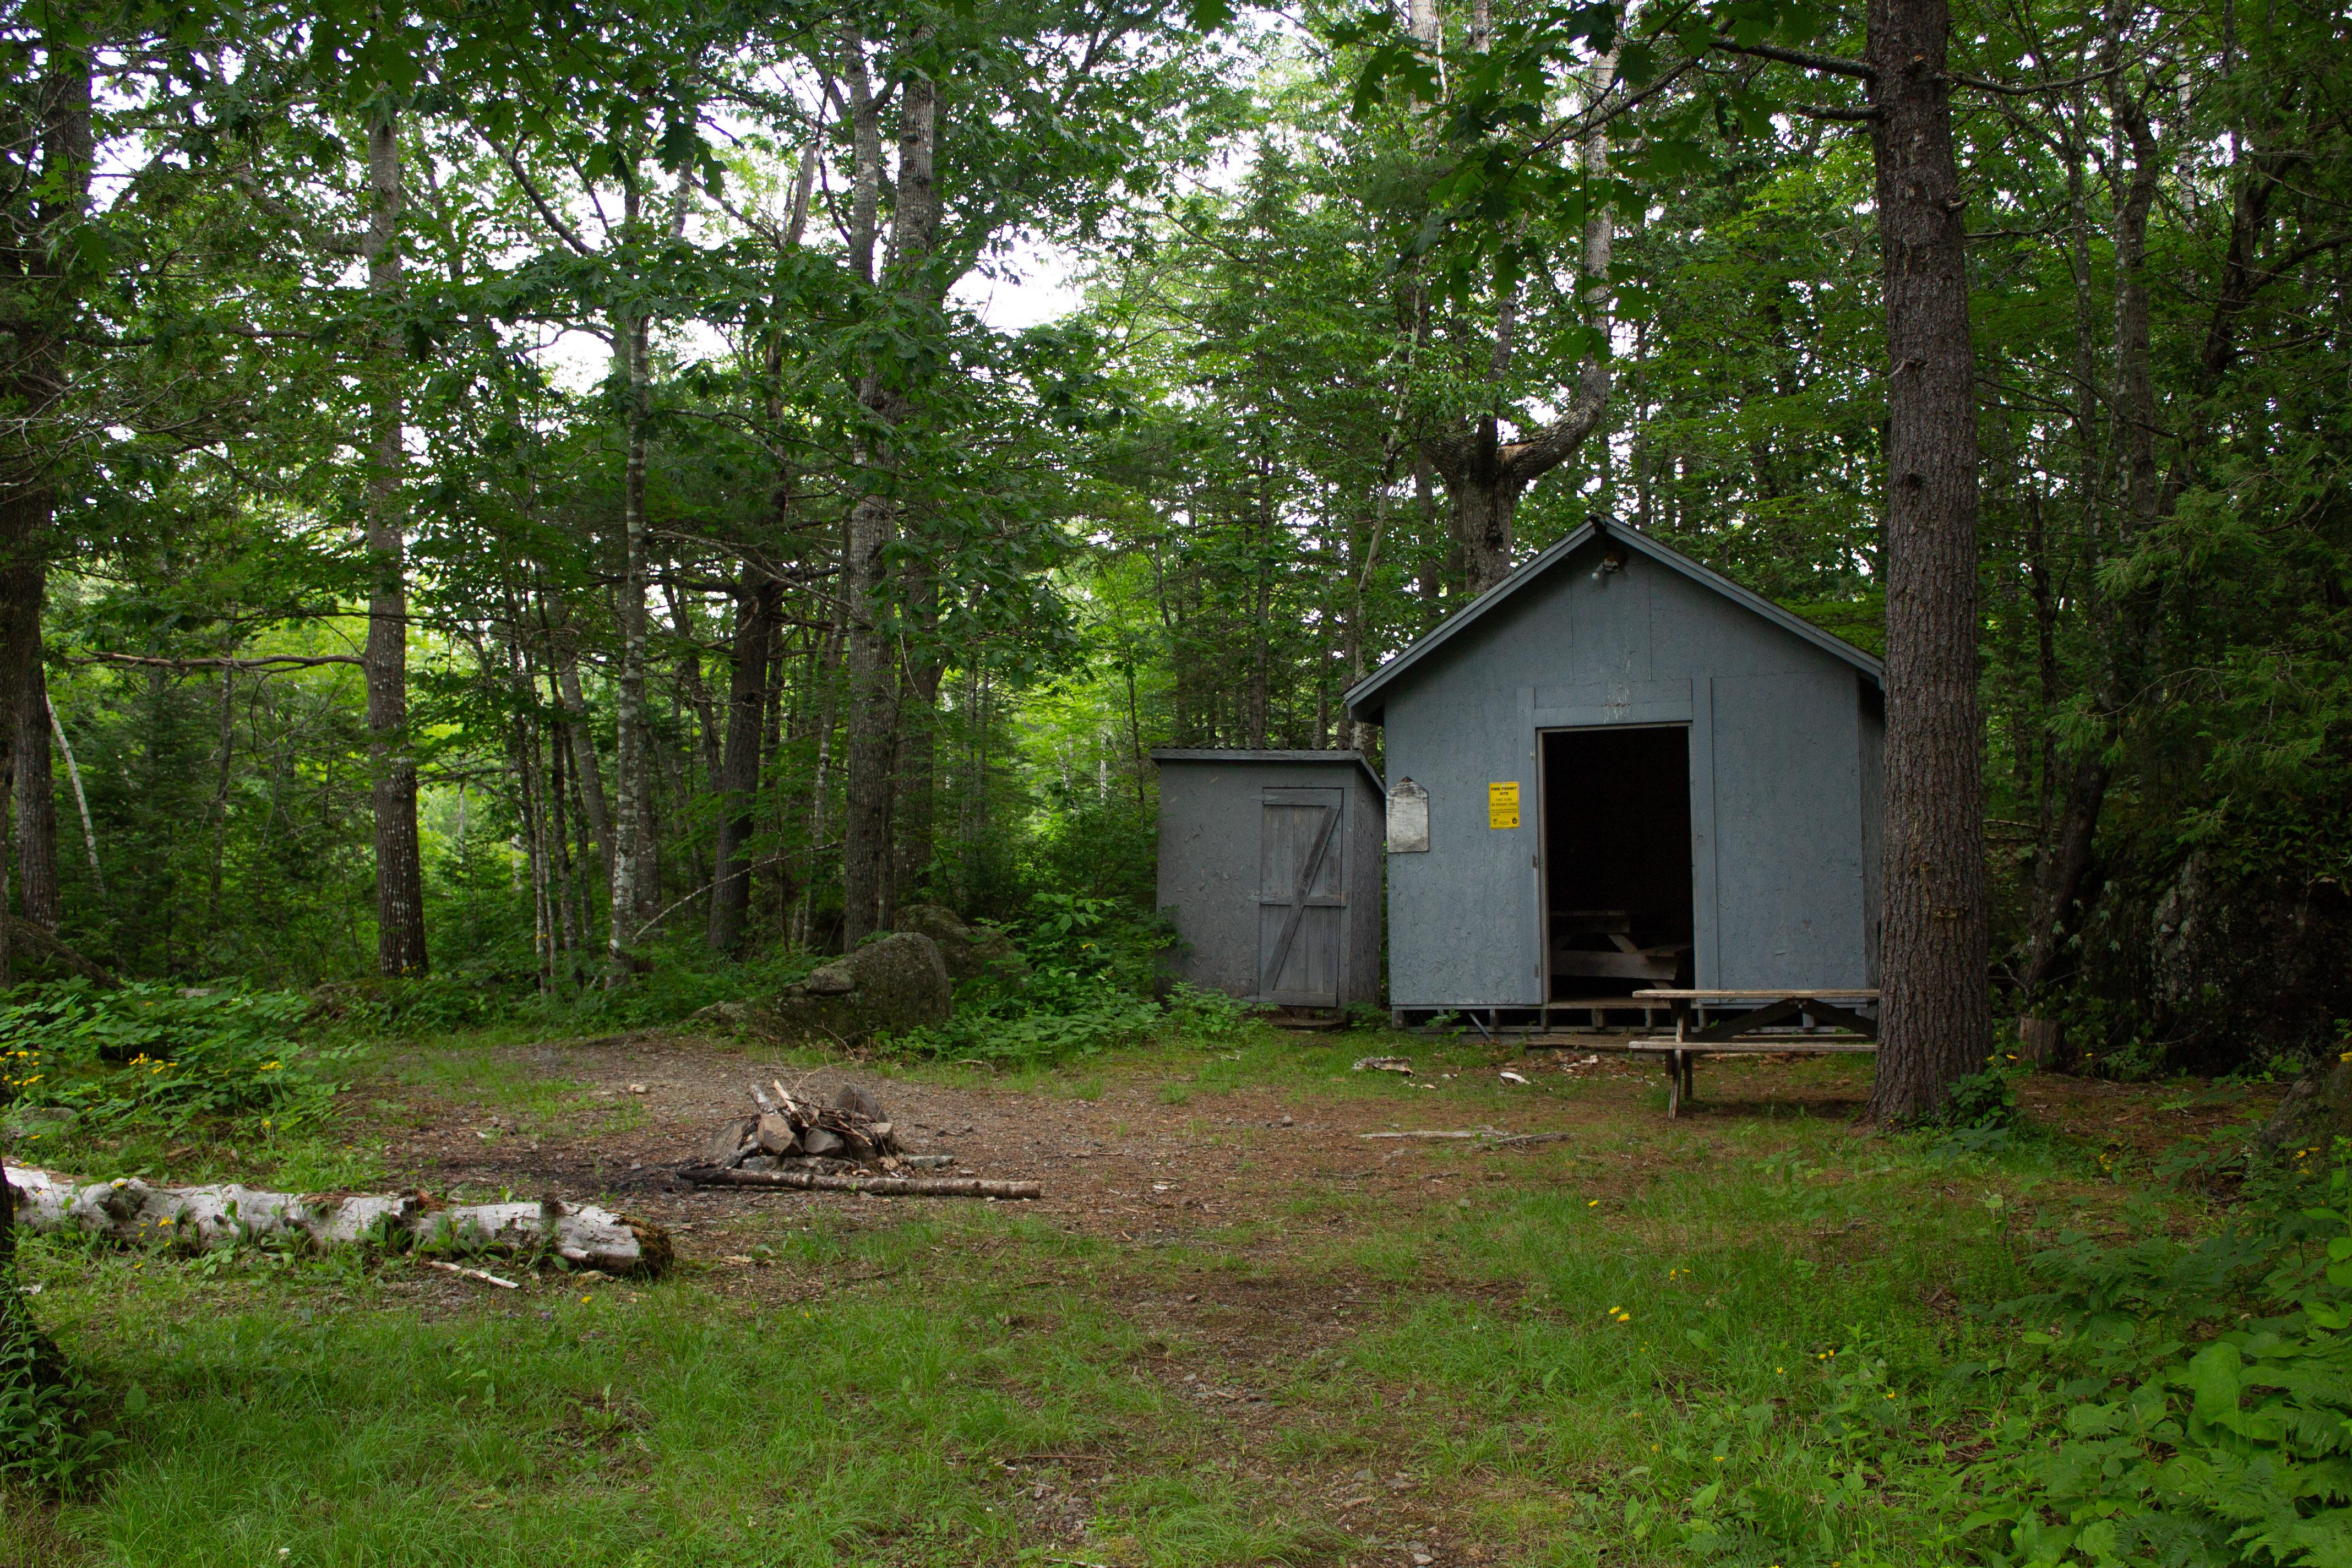 Campsite in a forest clearing witha storage shed behind.